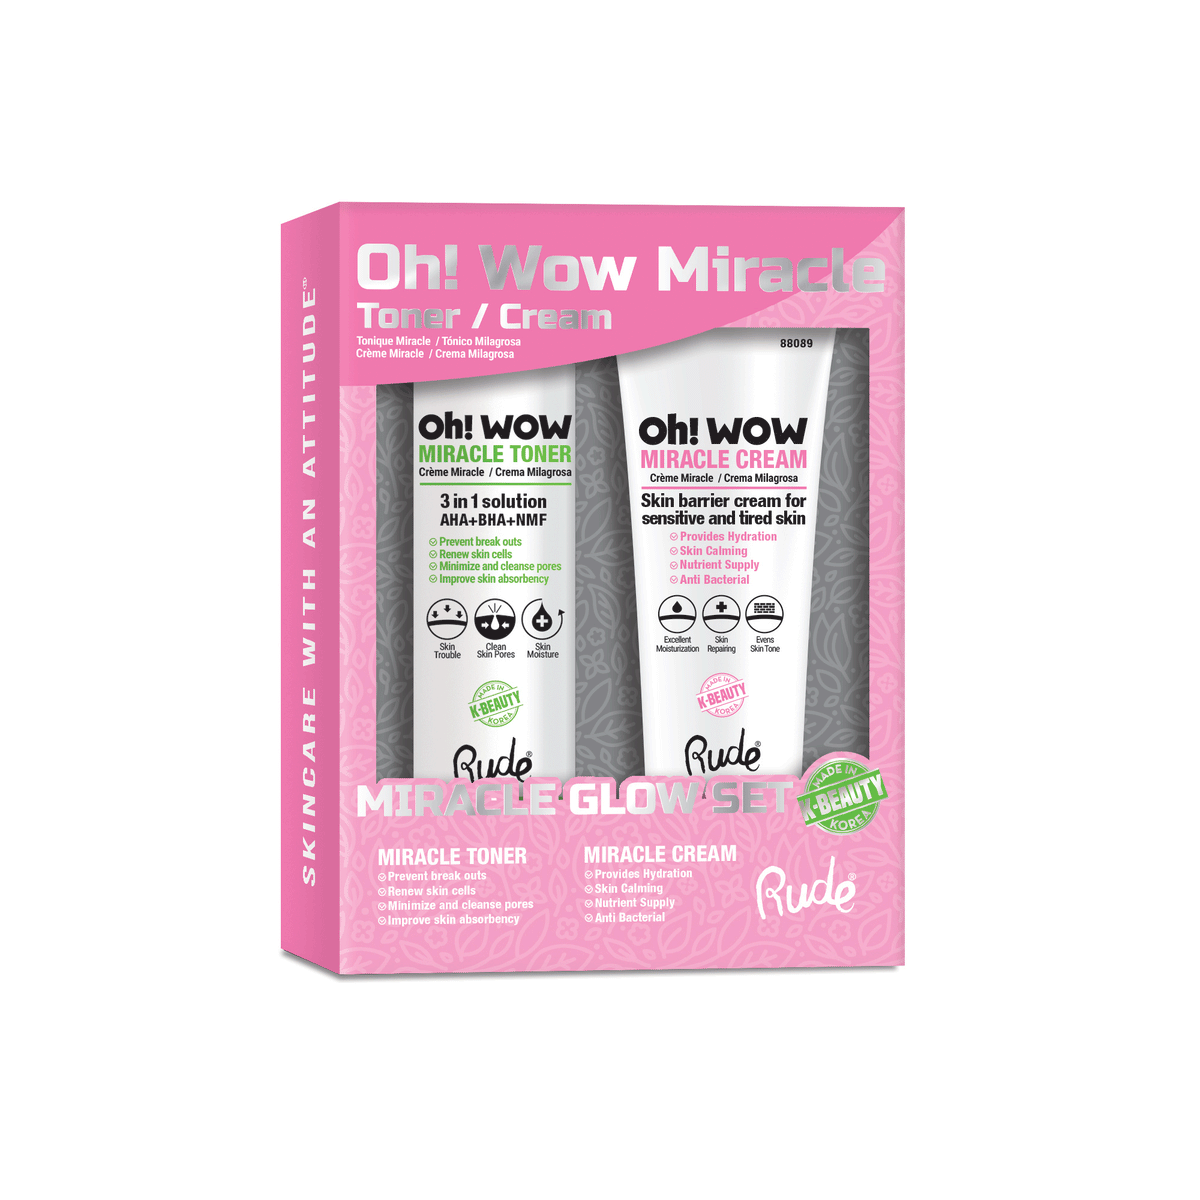 Oh Wow! Miracle - Miracle Glow Set